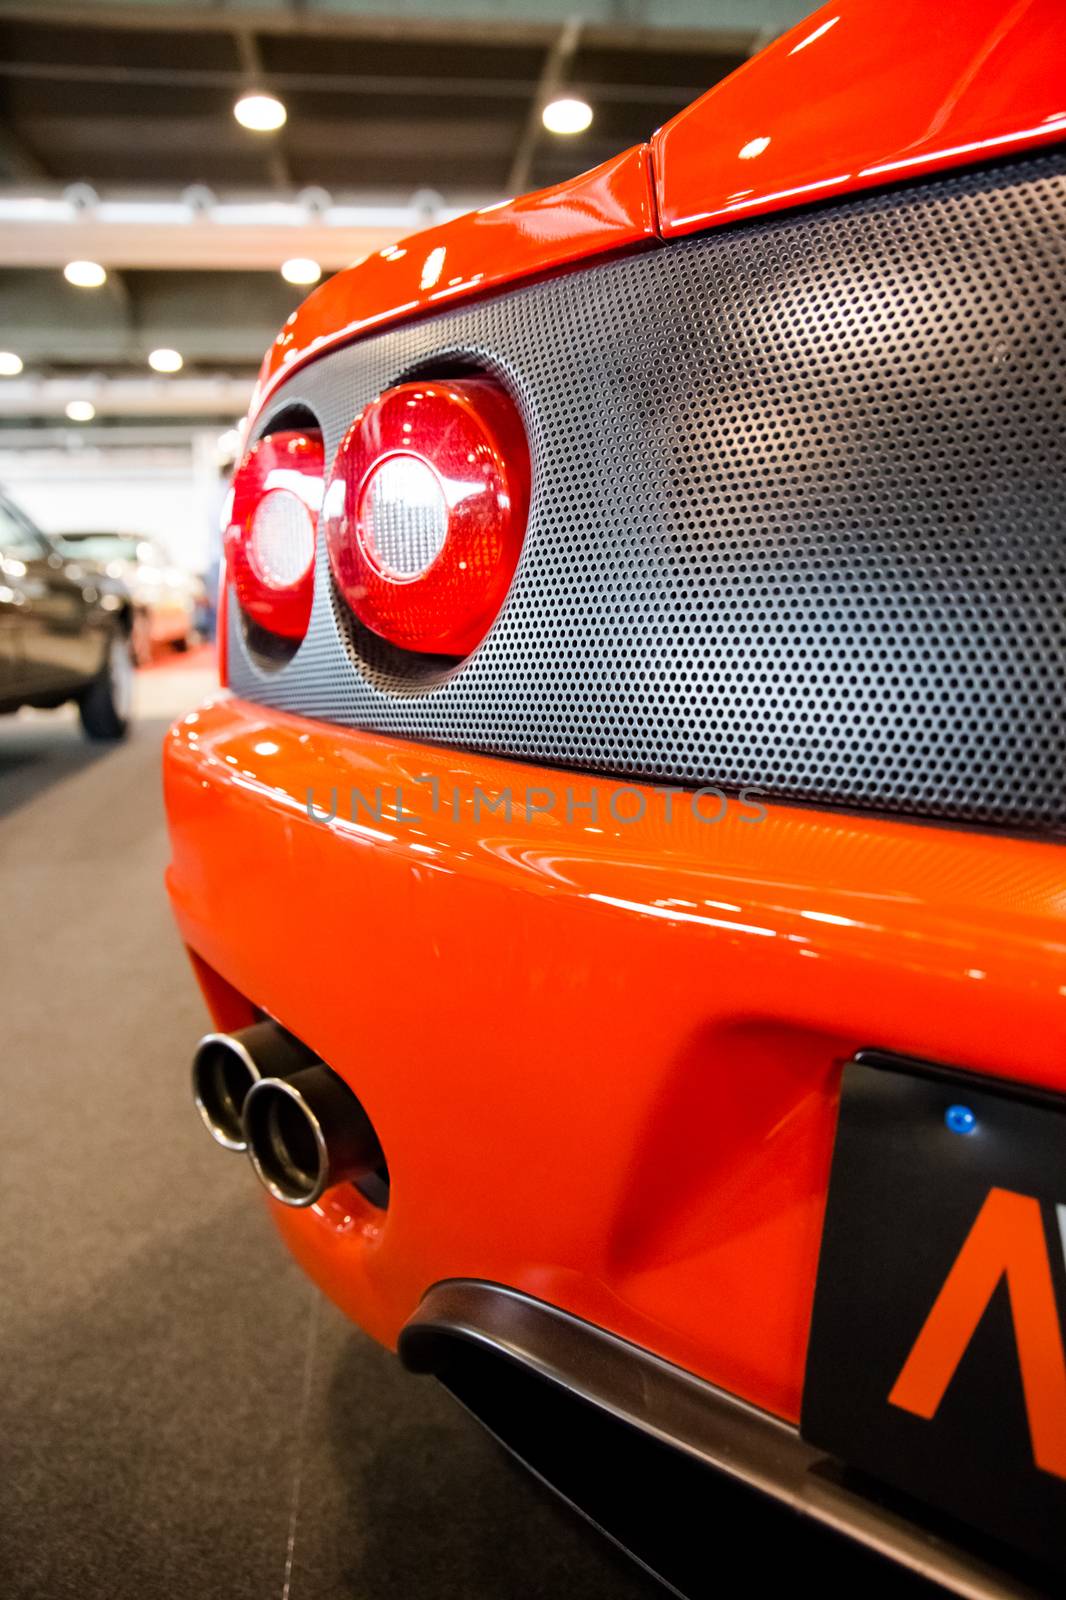 exhaust pipes and tail lights of a bright orange sports car